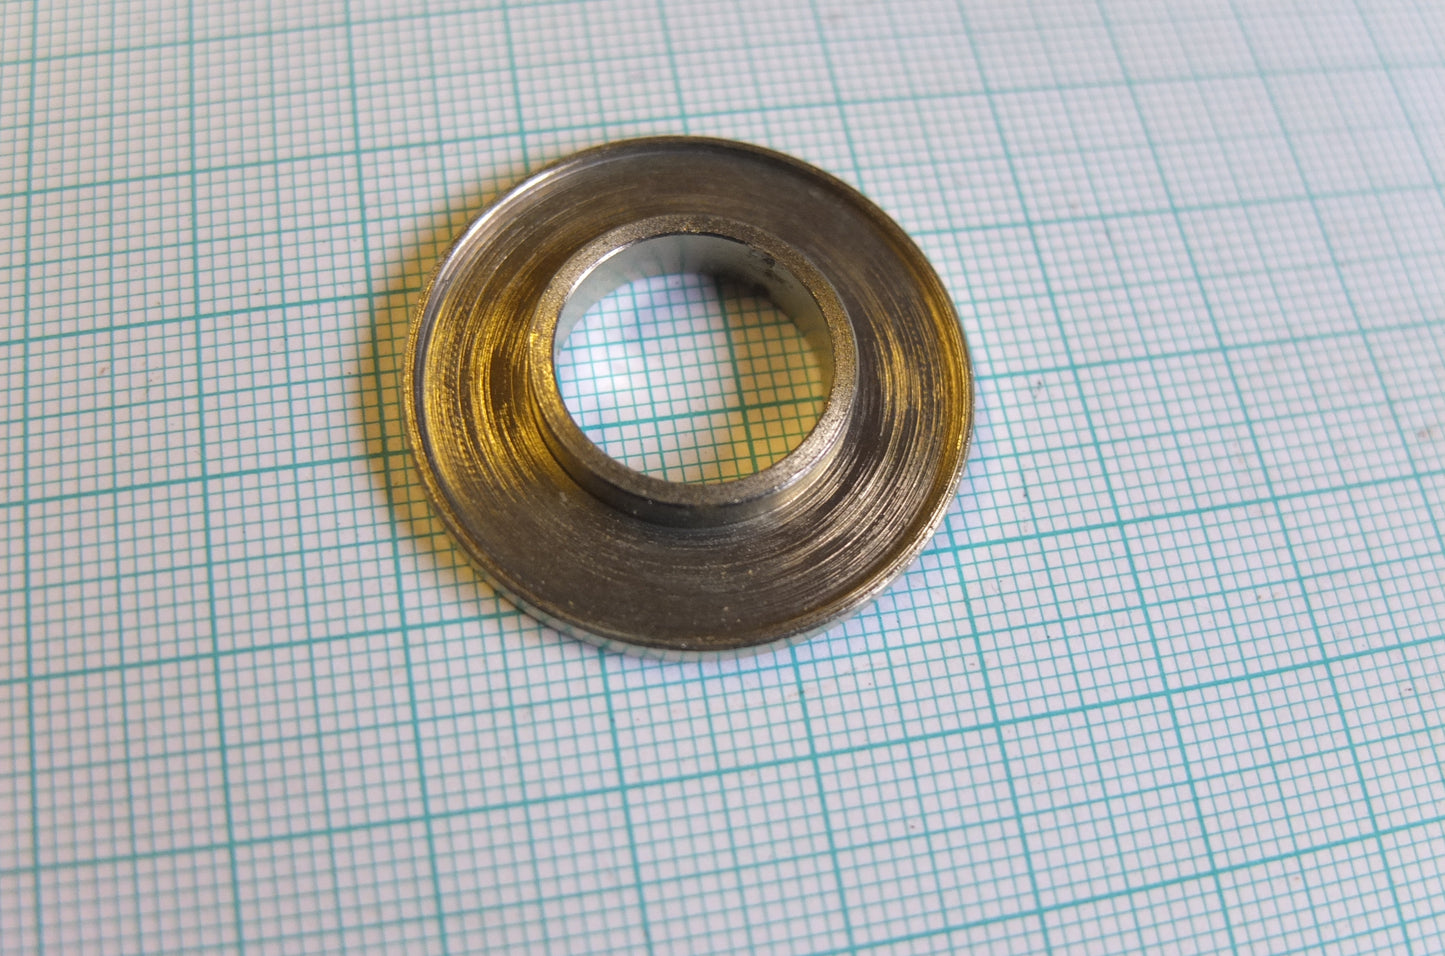 P4/040 Top Mounting Recessed Washer